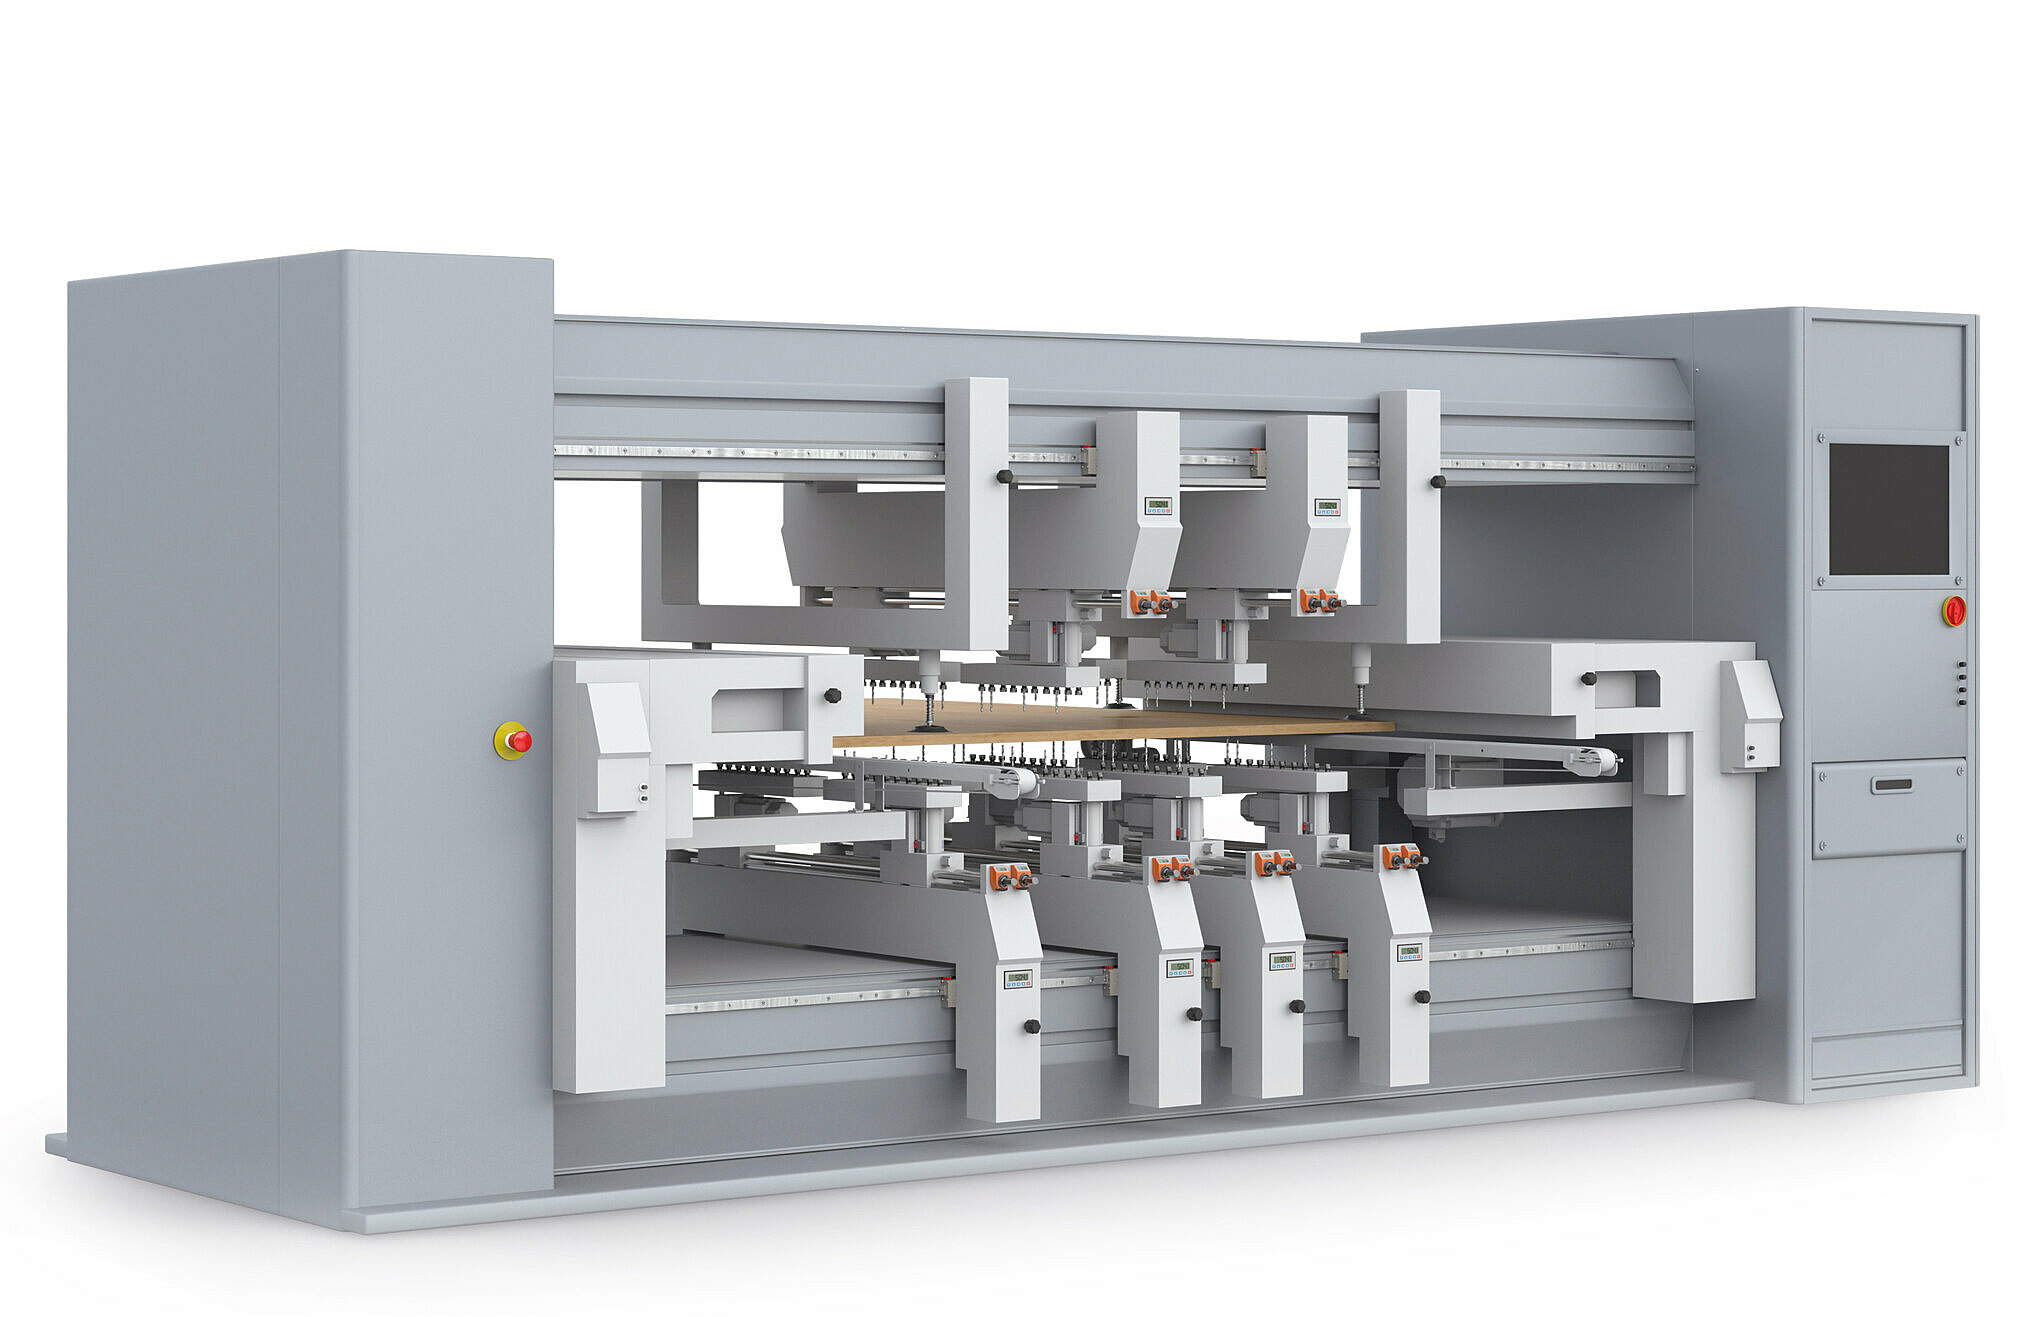 Positioning systems for dowel drilling machines by SIKO